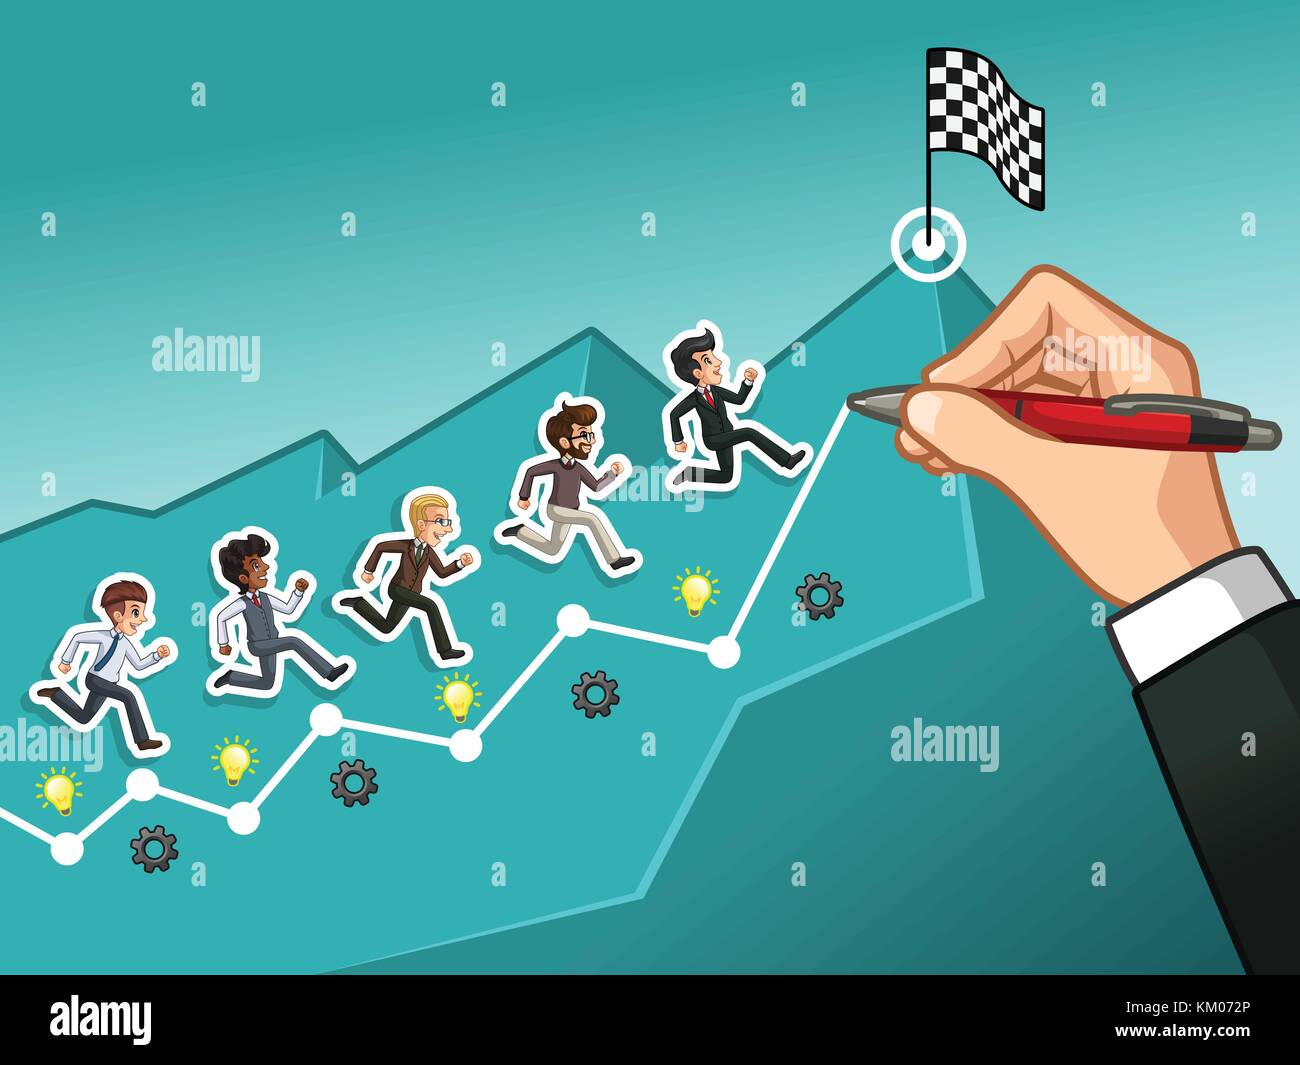 Hand drawing a line leading to the goal, running towards the goal businessman concept, against tosca background. Stock Vector